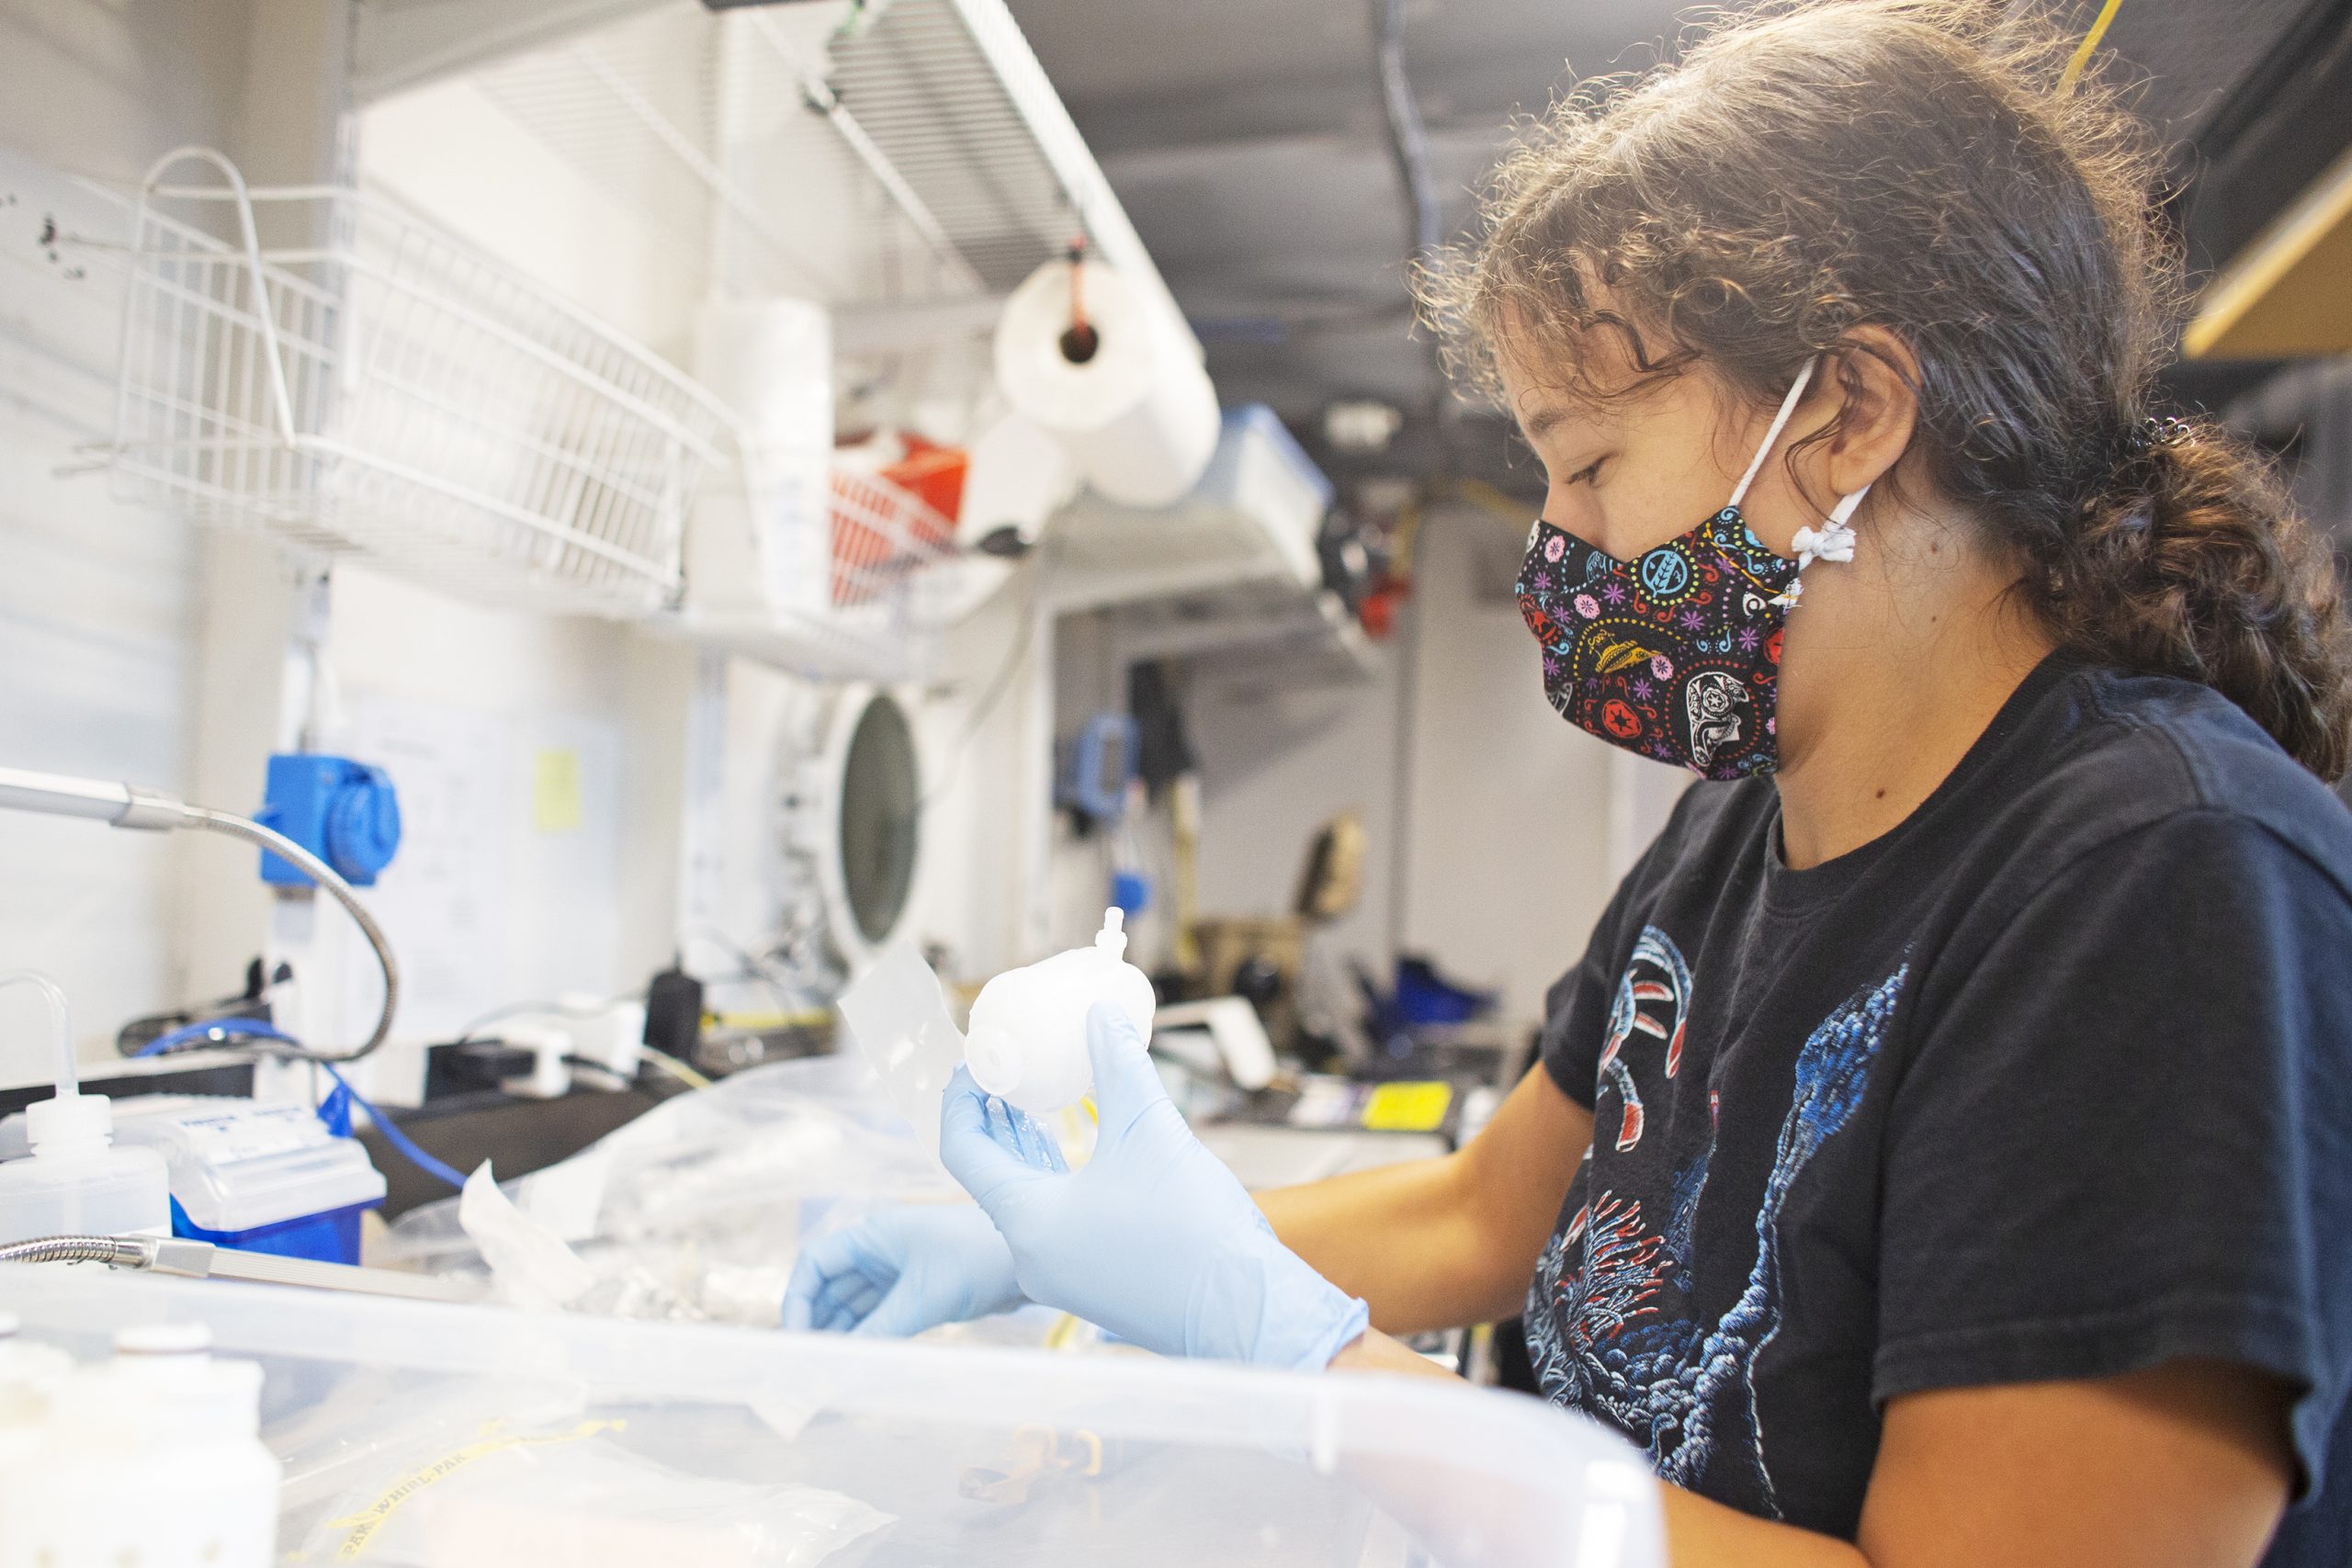 WHOI research assistant Erin Frates processes a batch of samples in the Wet Lab after a Mesobot dive on September 28, 2021. (Photo: OET/Nautilus Live)